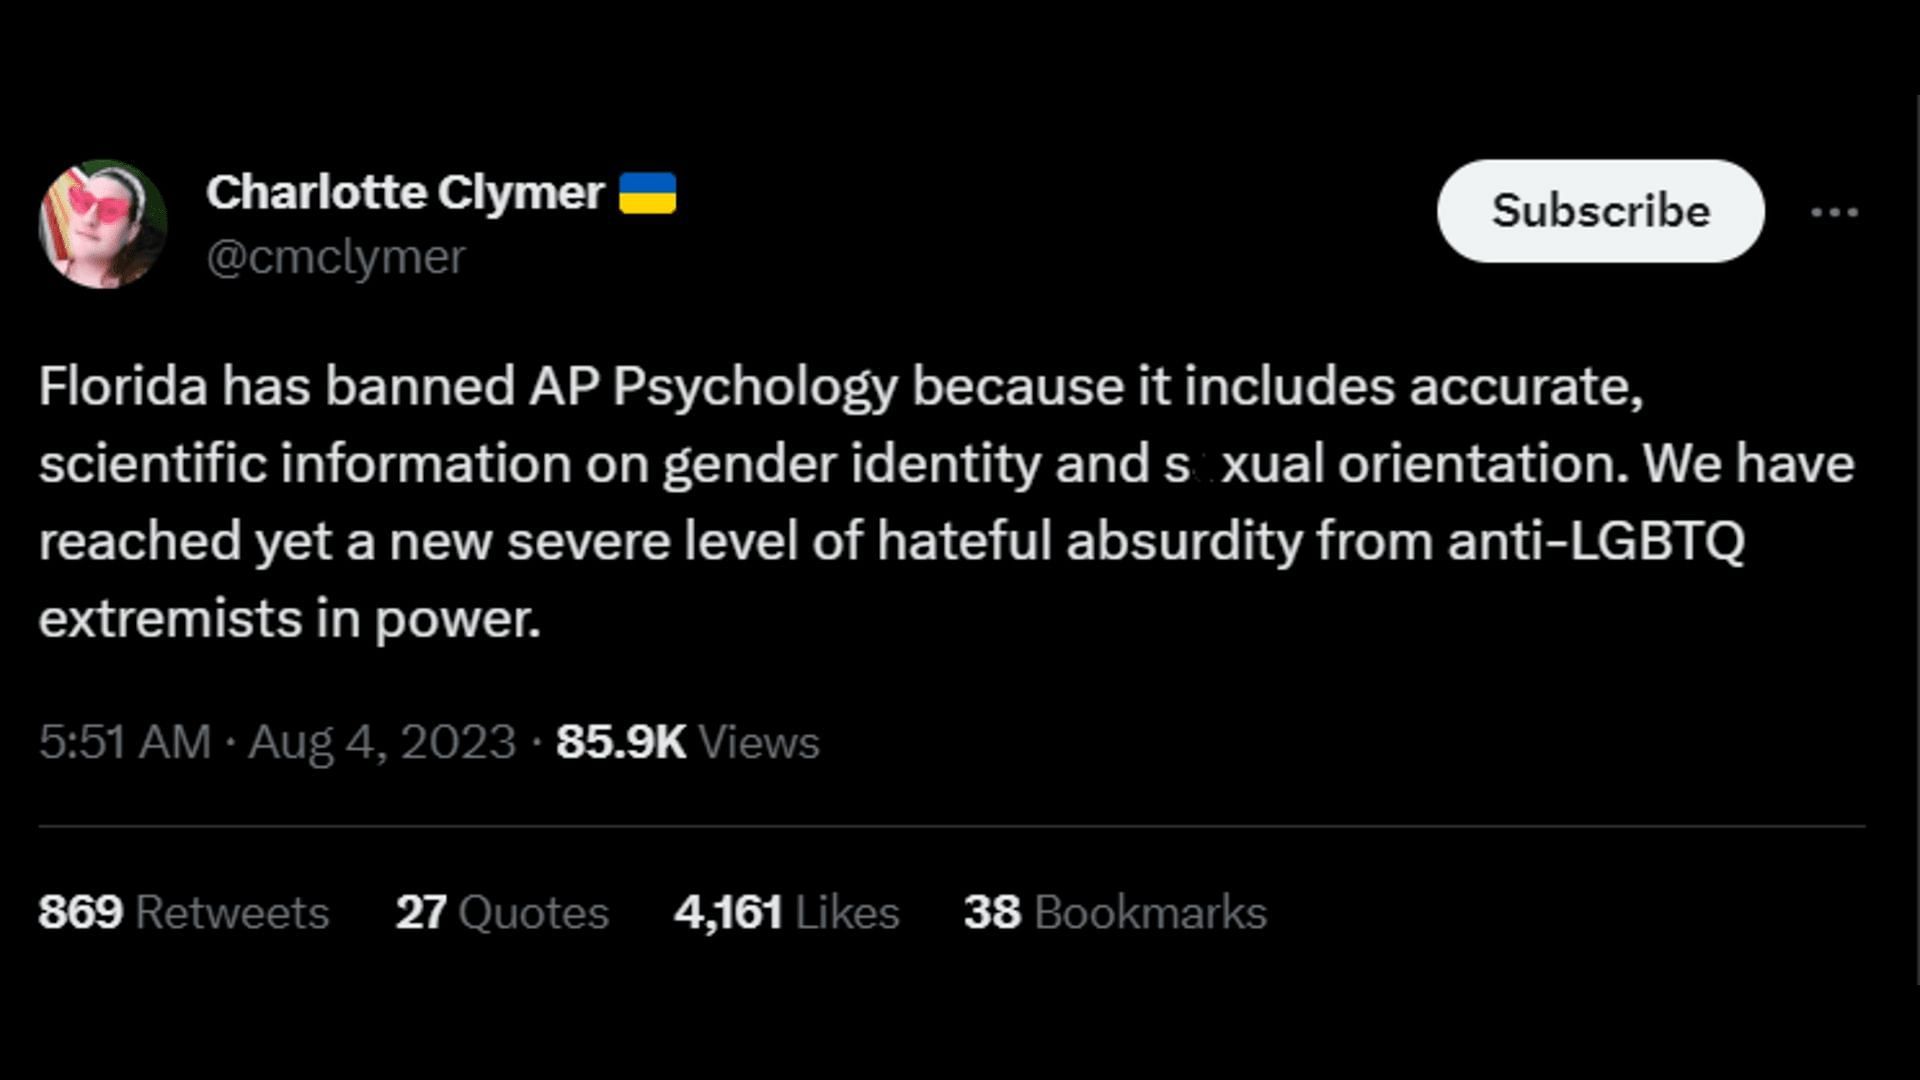 A netizen calls the move to ban the AP course anti-LGBTQ. (Image via Twitter/Charlotte Clymer)